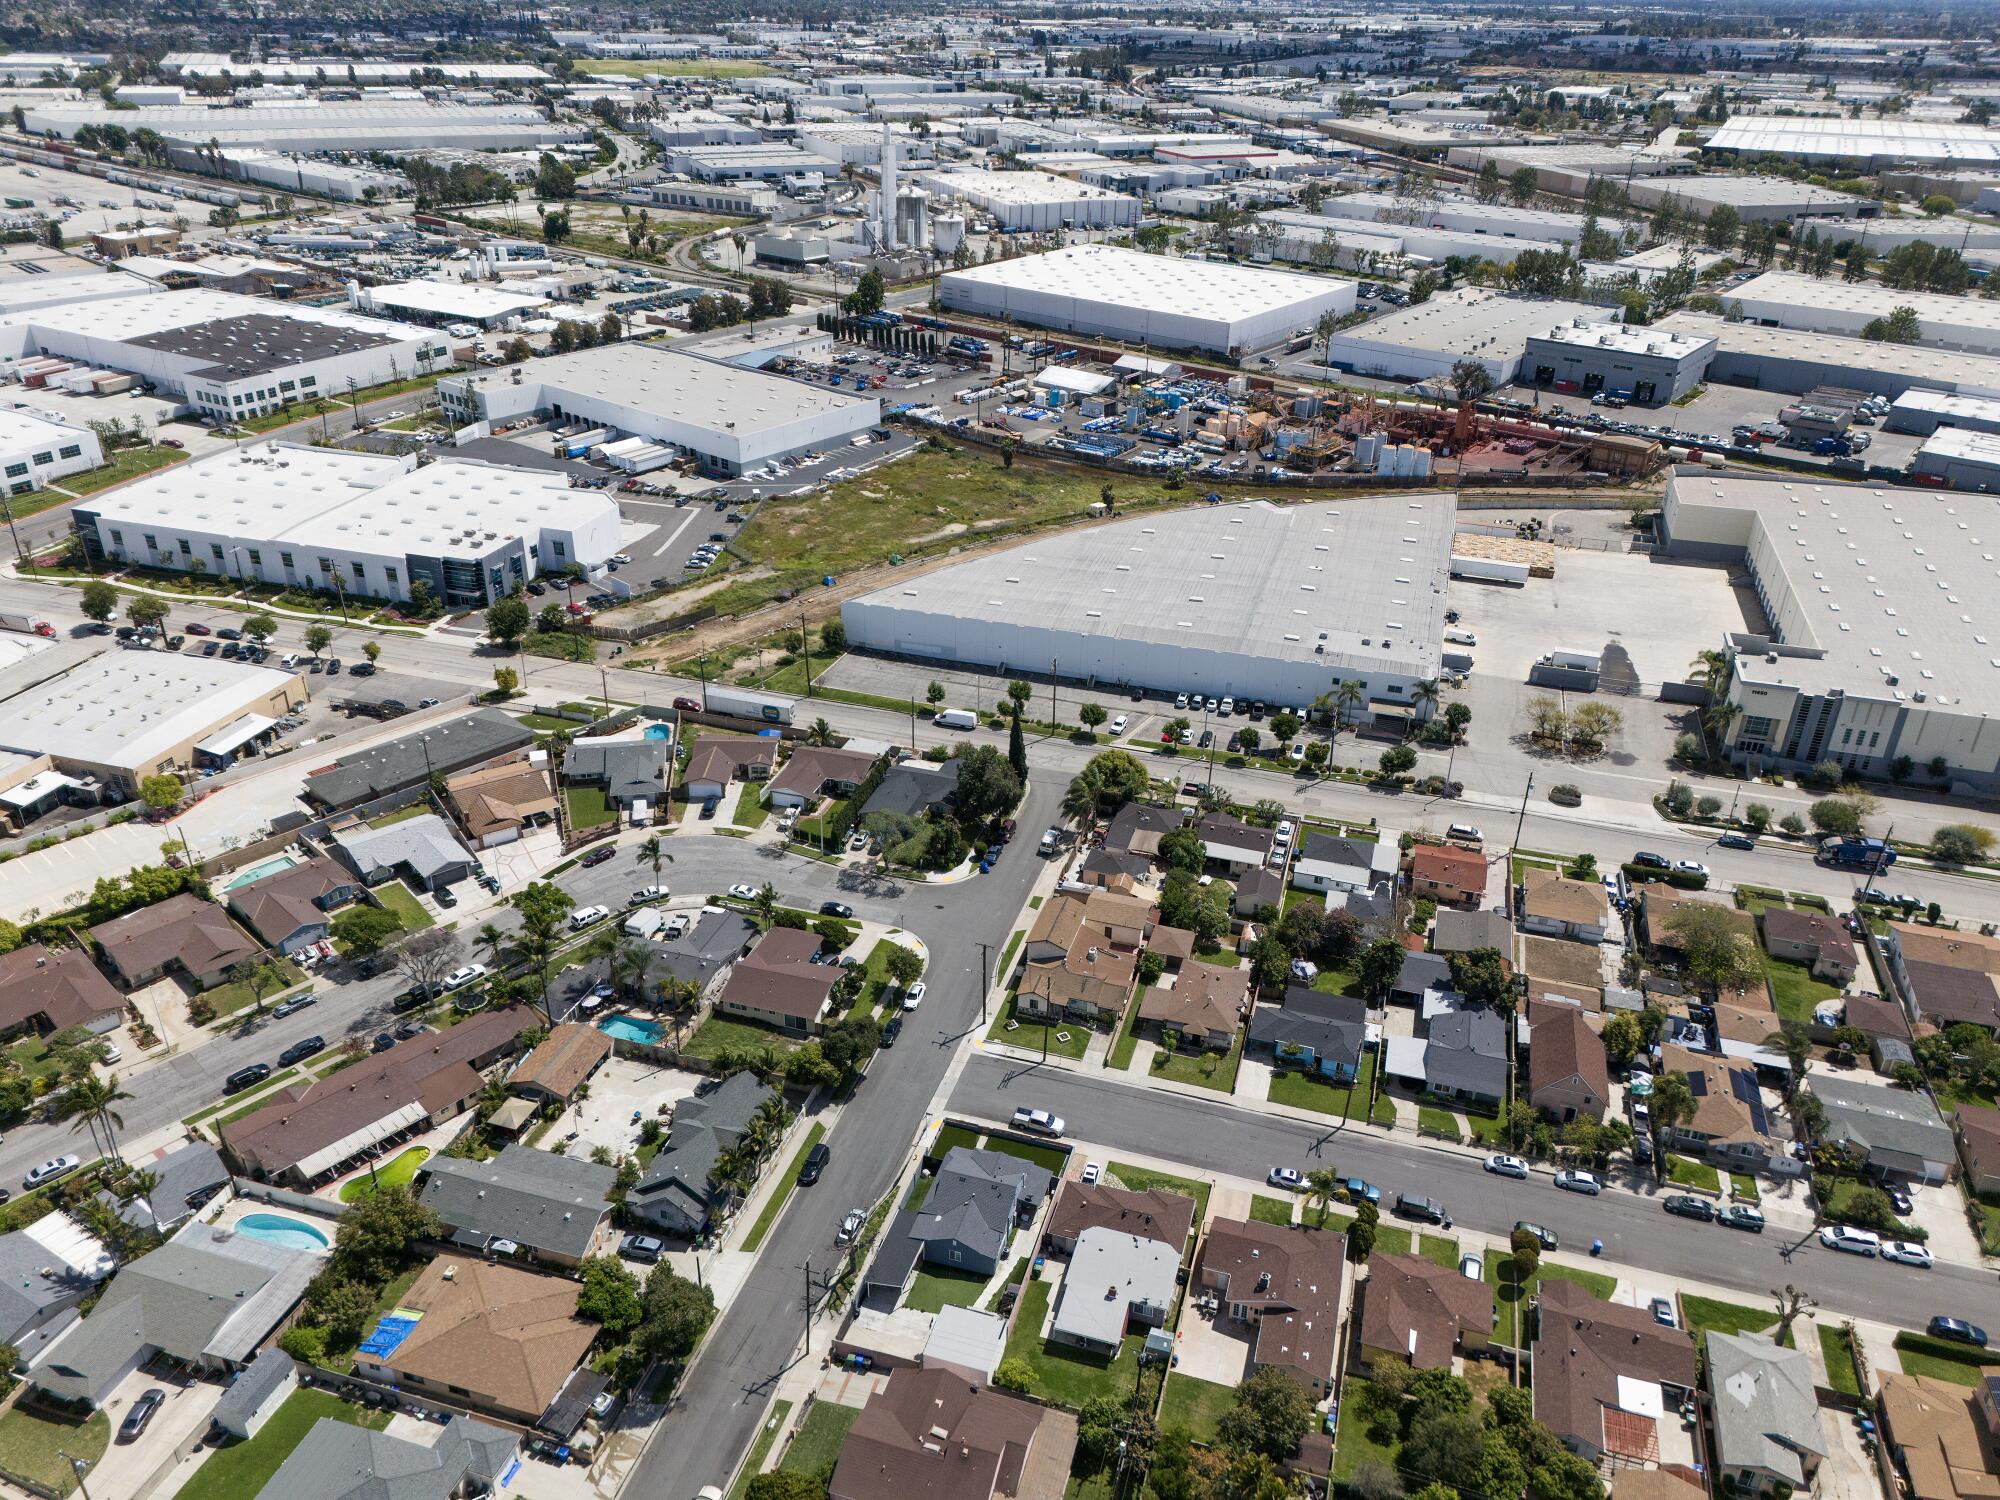 The homes in the foreground in this aerial image are near industrial businesses, including a hazardous waste processing facility.